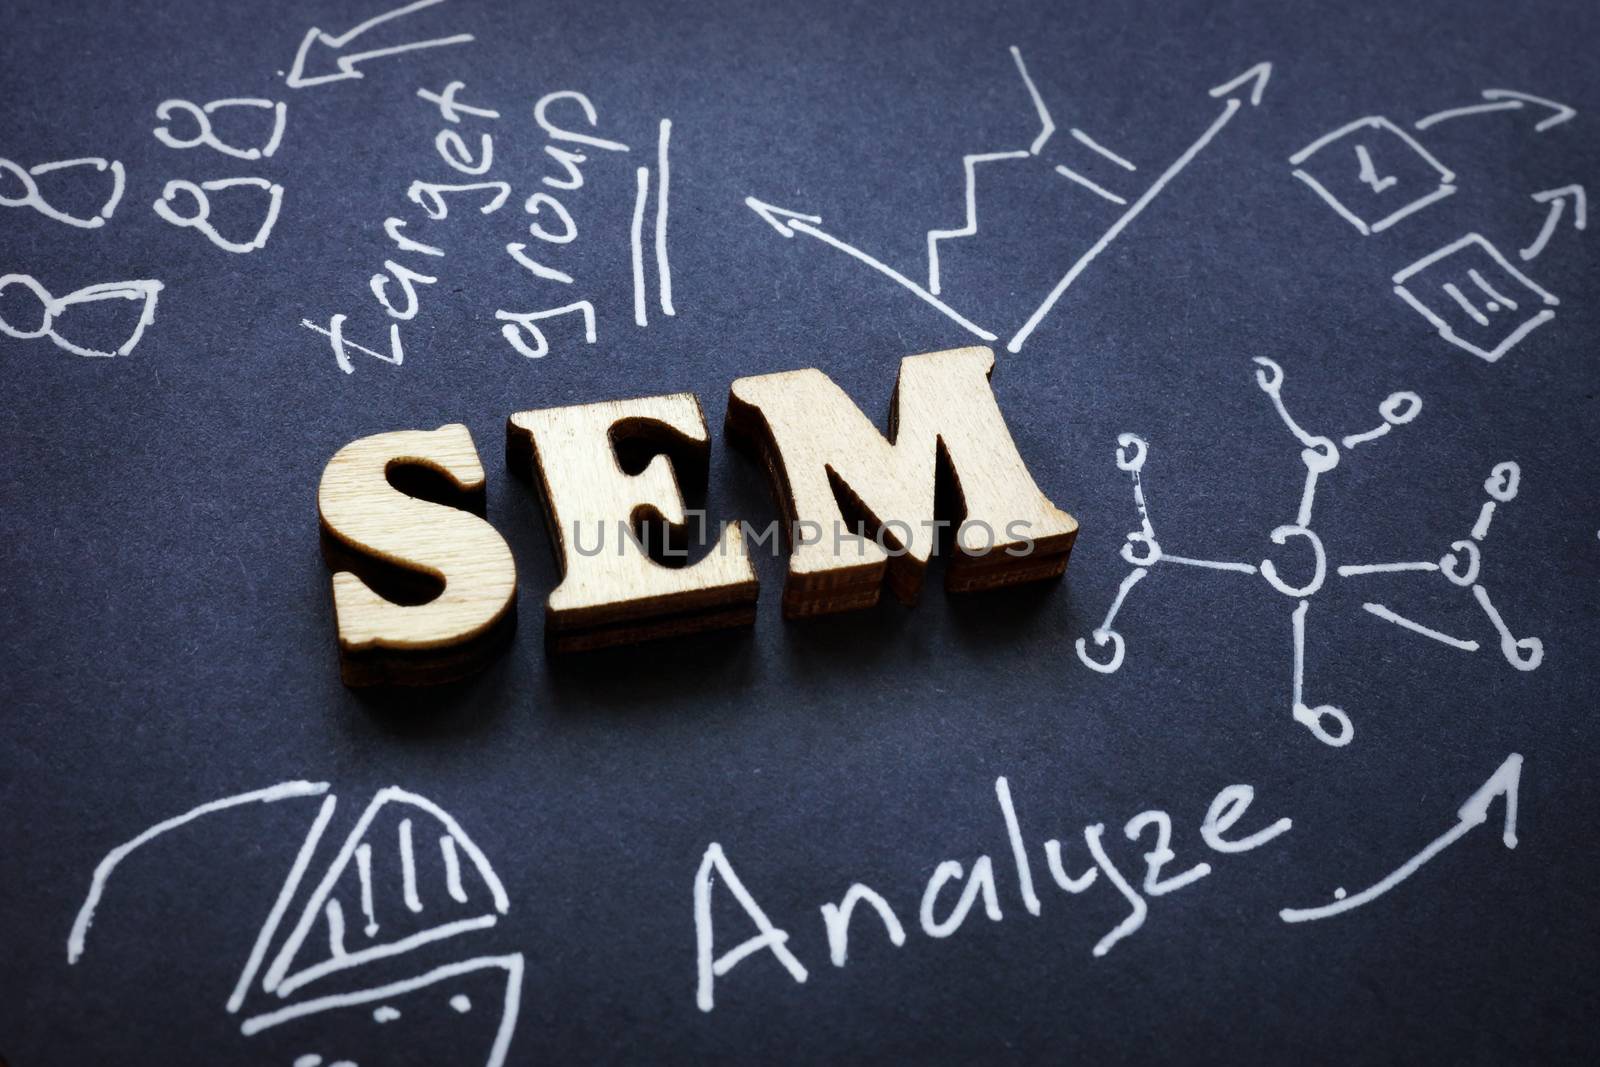 SEM letters from wood as abbreviation Search Engine Marketing. by designer491